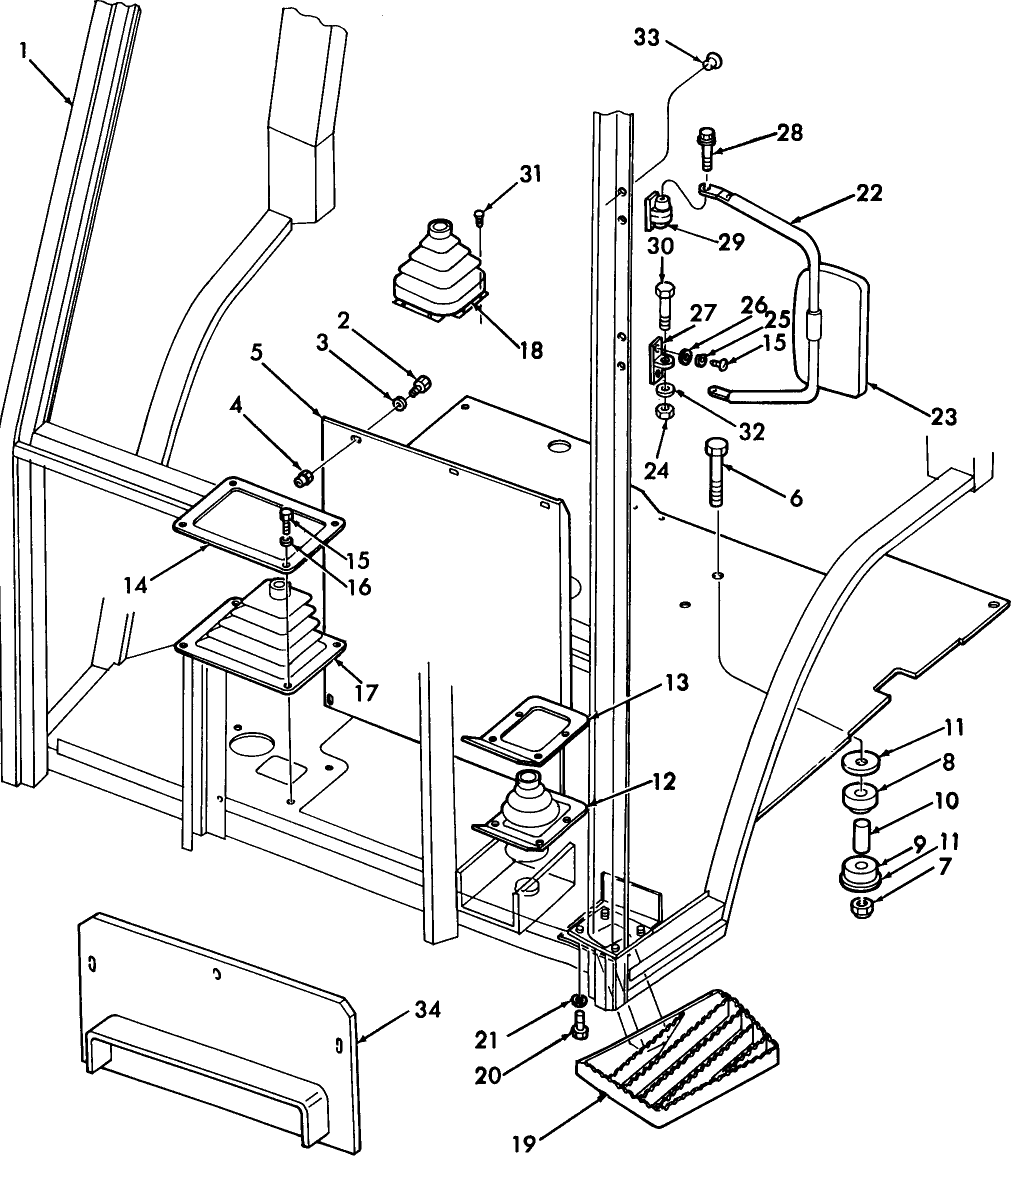 15B01 CAB FRAME & RELATED PARTS